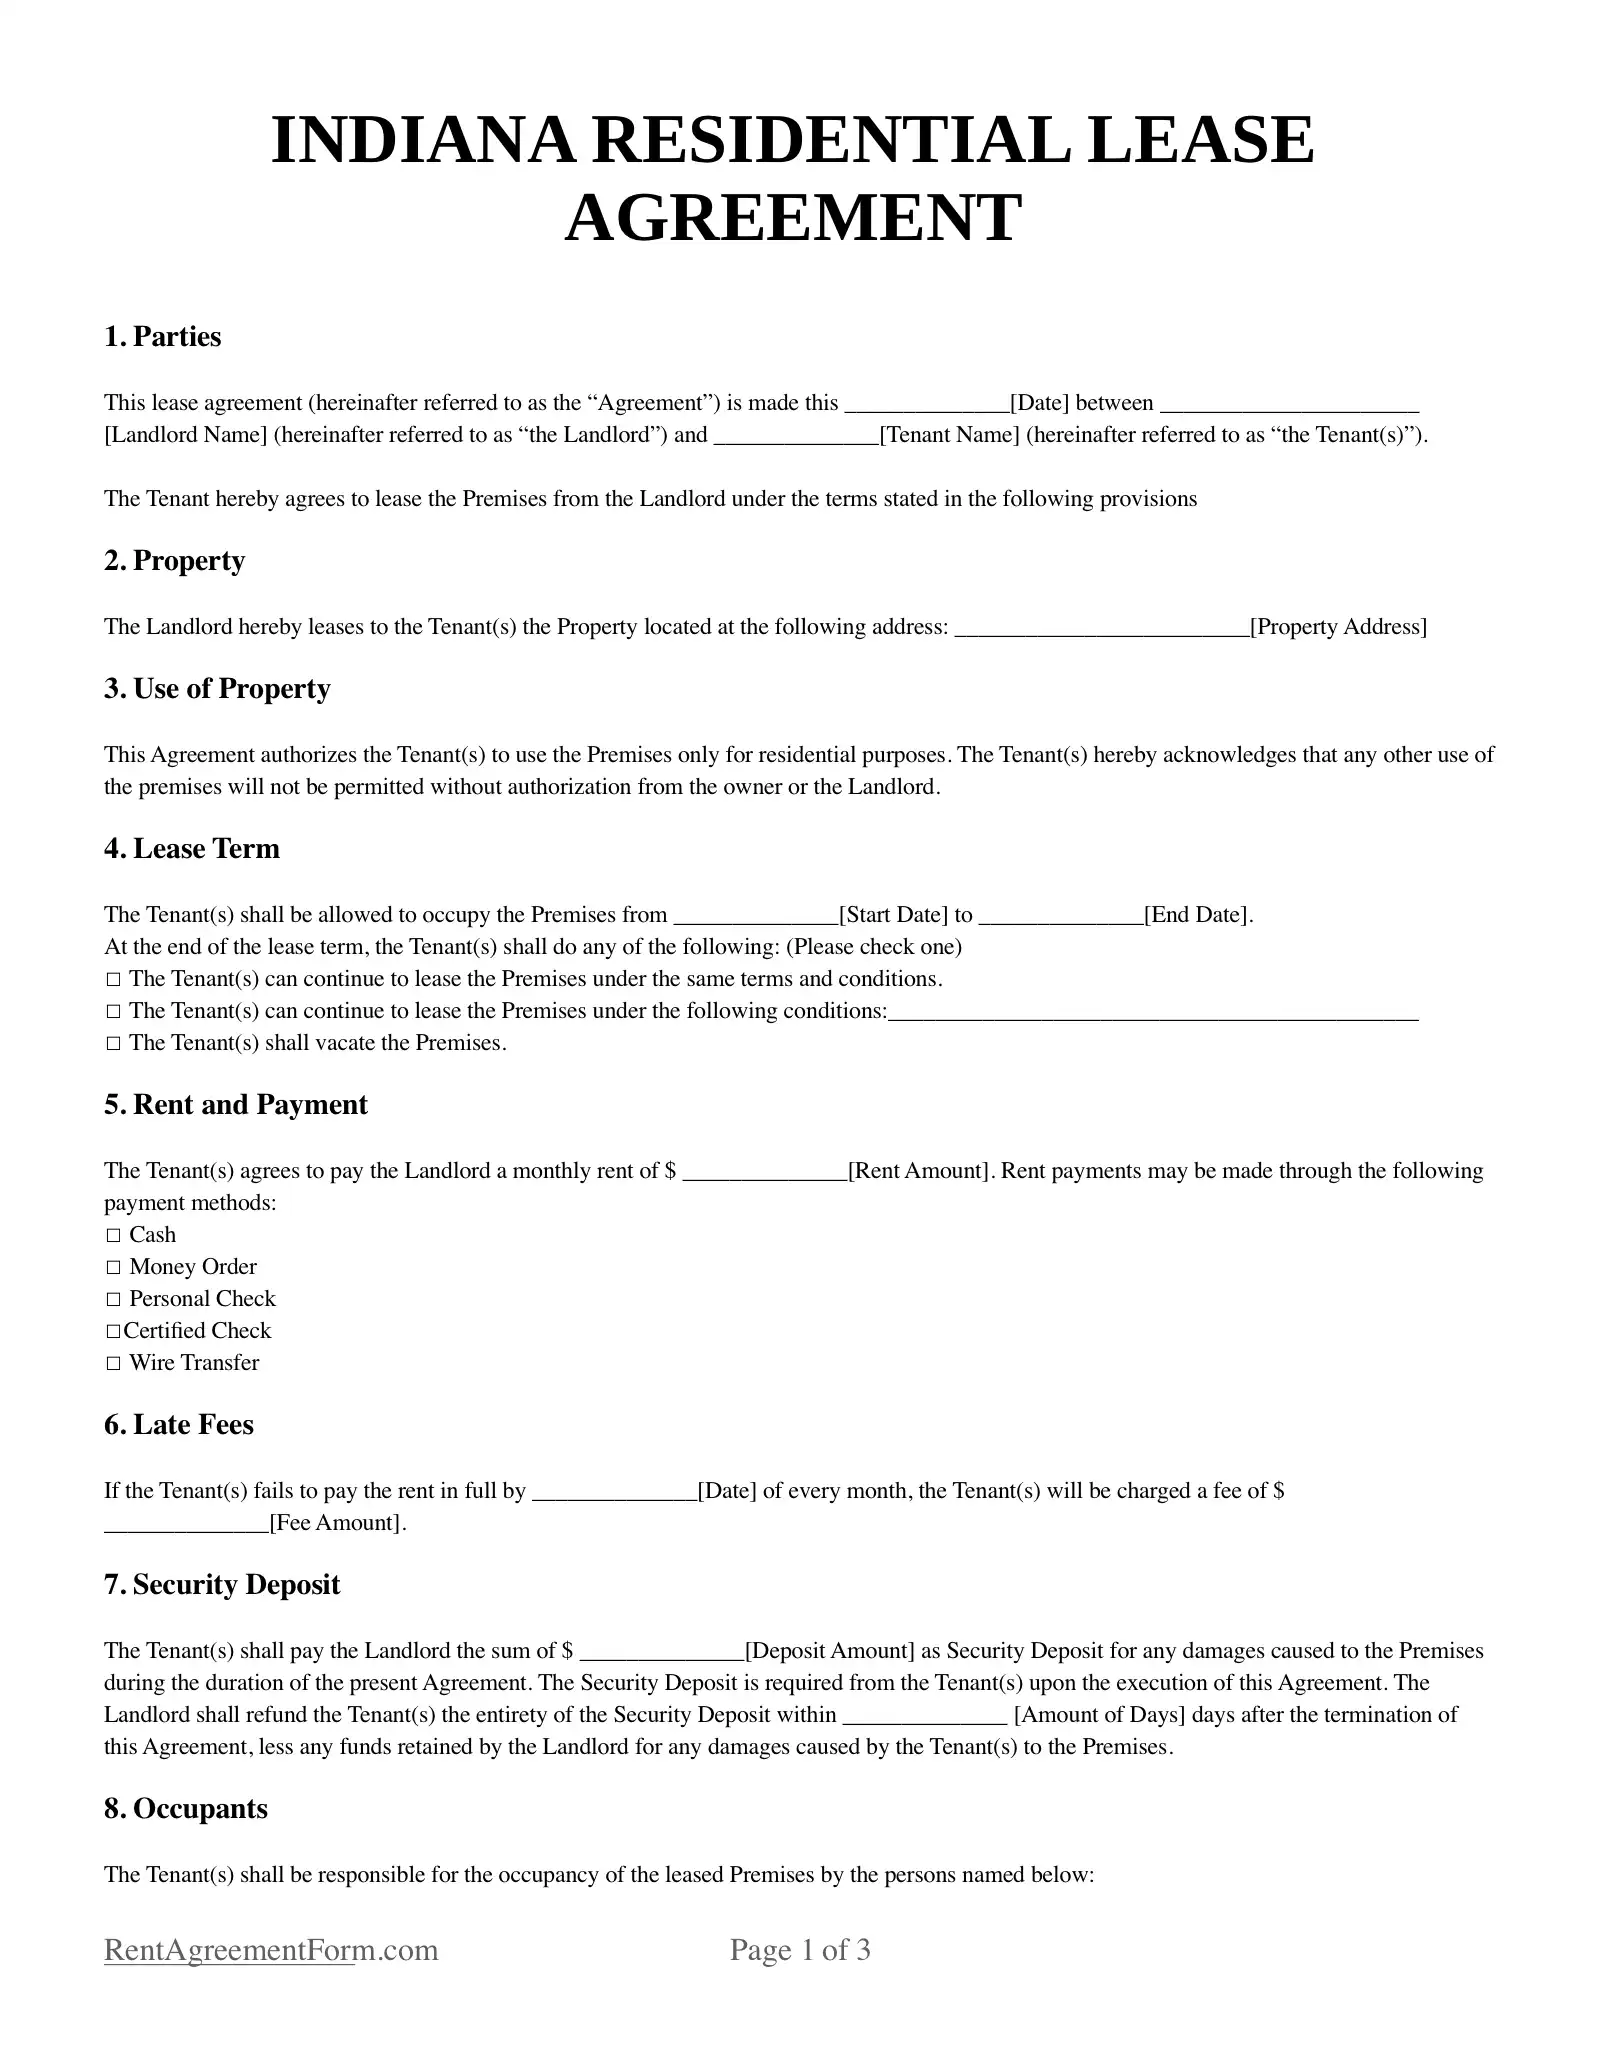 Indiana Residential Lease Agreement Sample